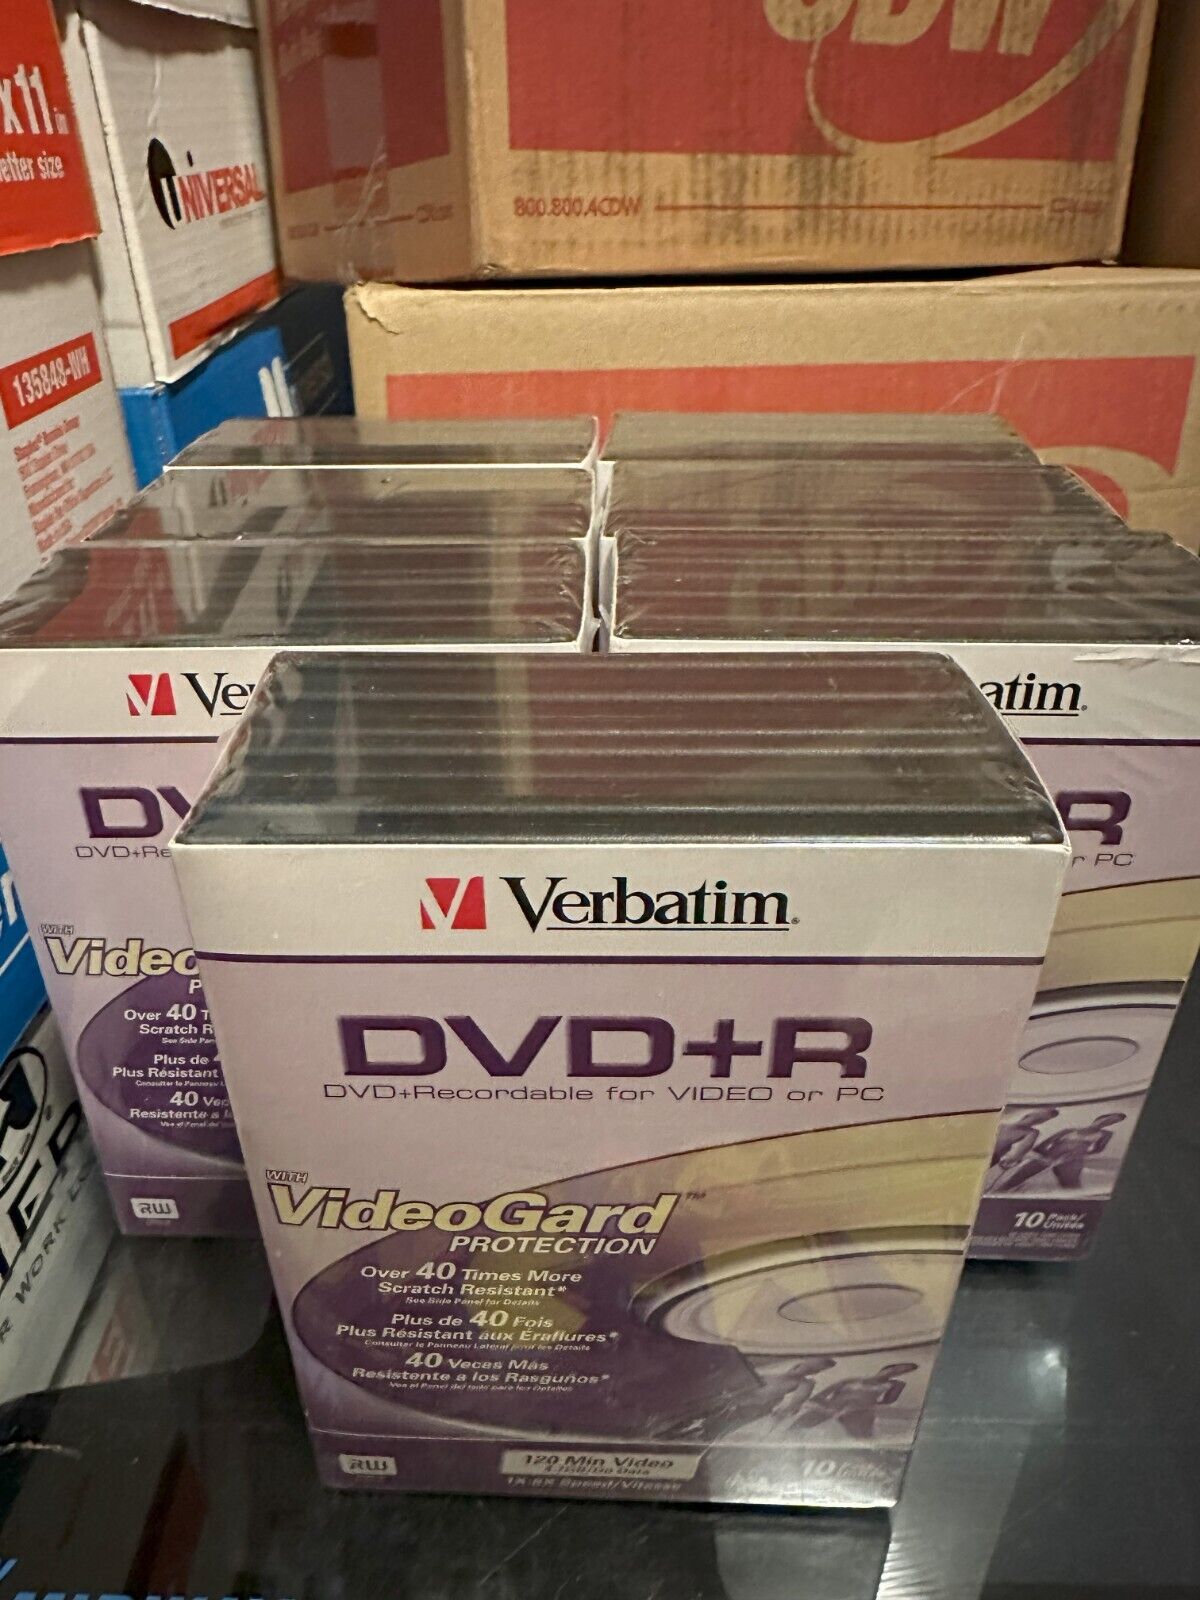 Verbatim DVD+R with VideoGard Scratch Protection 9 Packs = 90 Discs